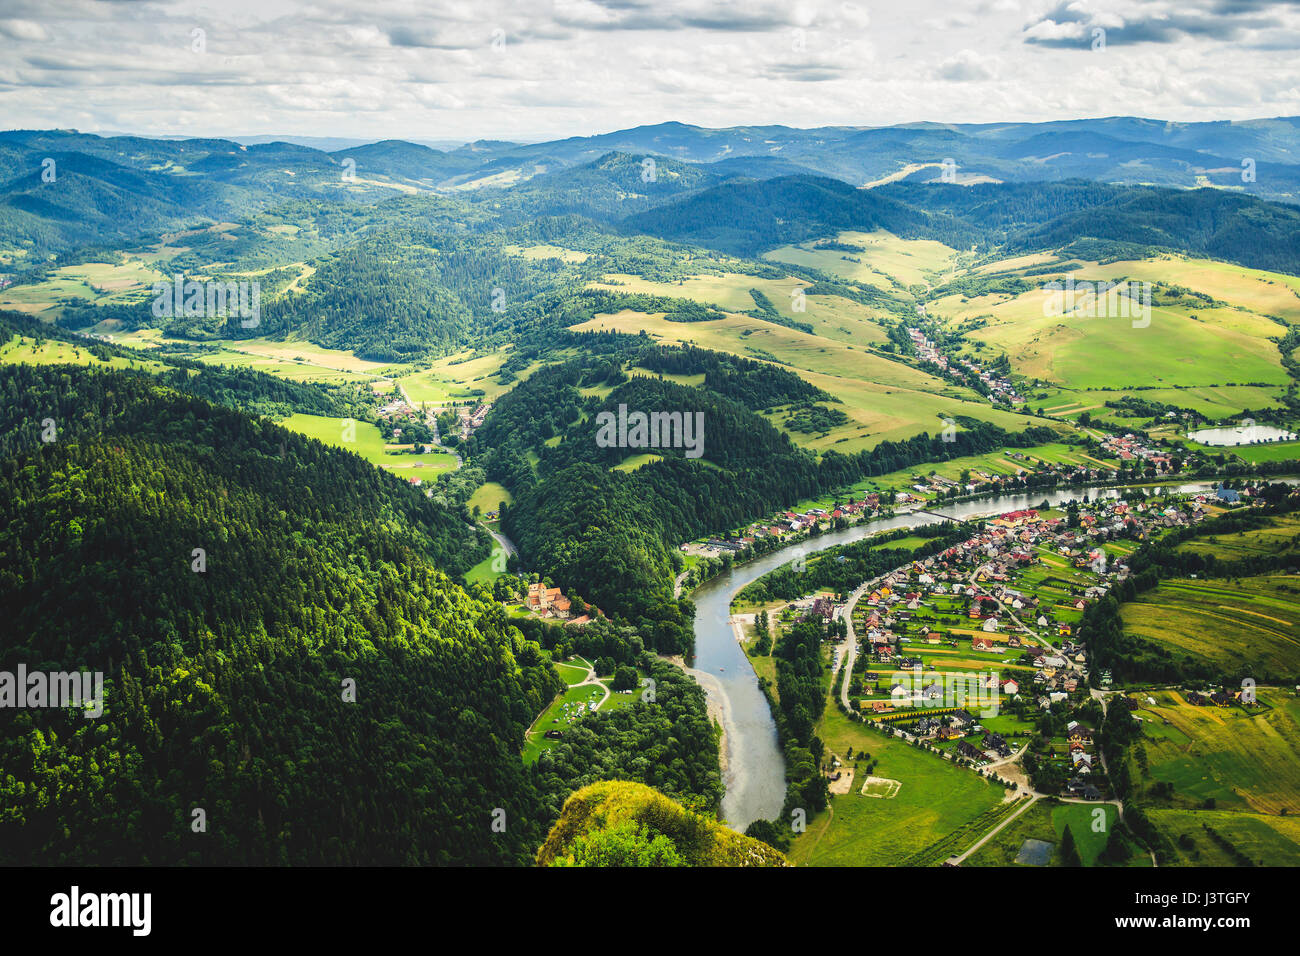 Aerial view from the Trzy Korony peak in the Pieniny mountains in Poland. Stock Photo